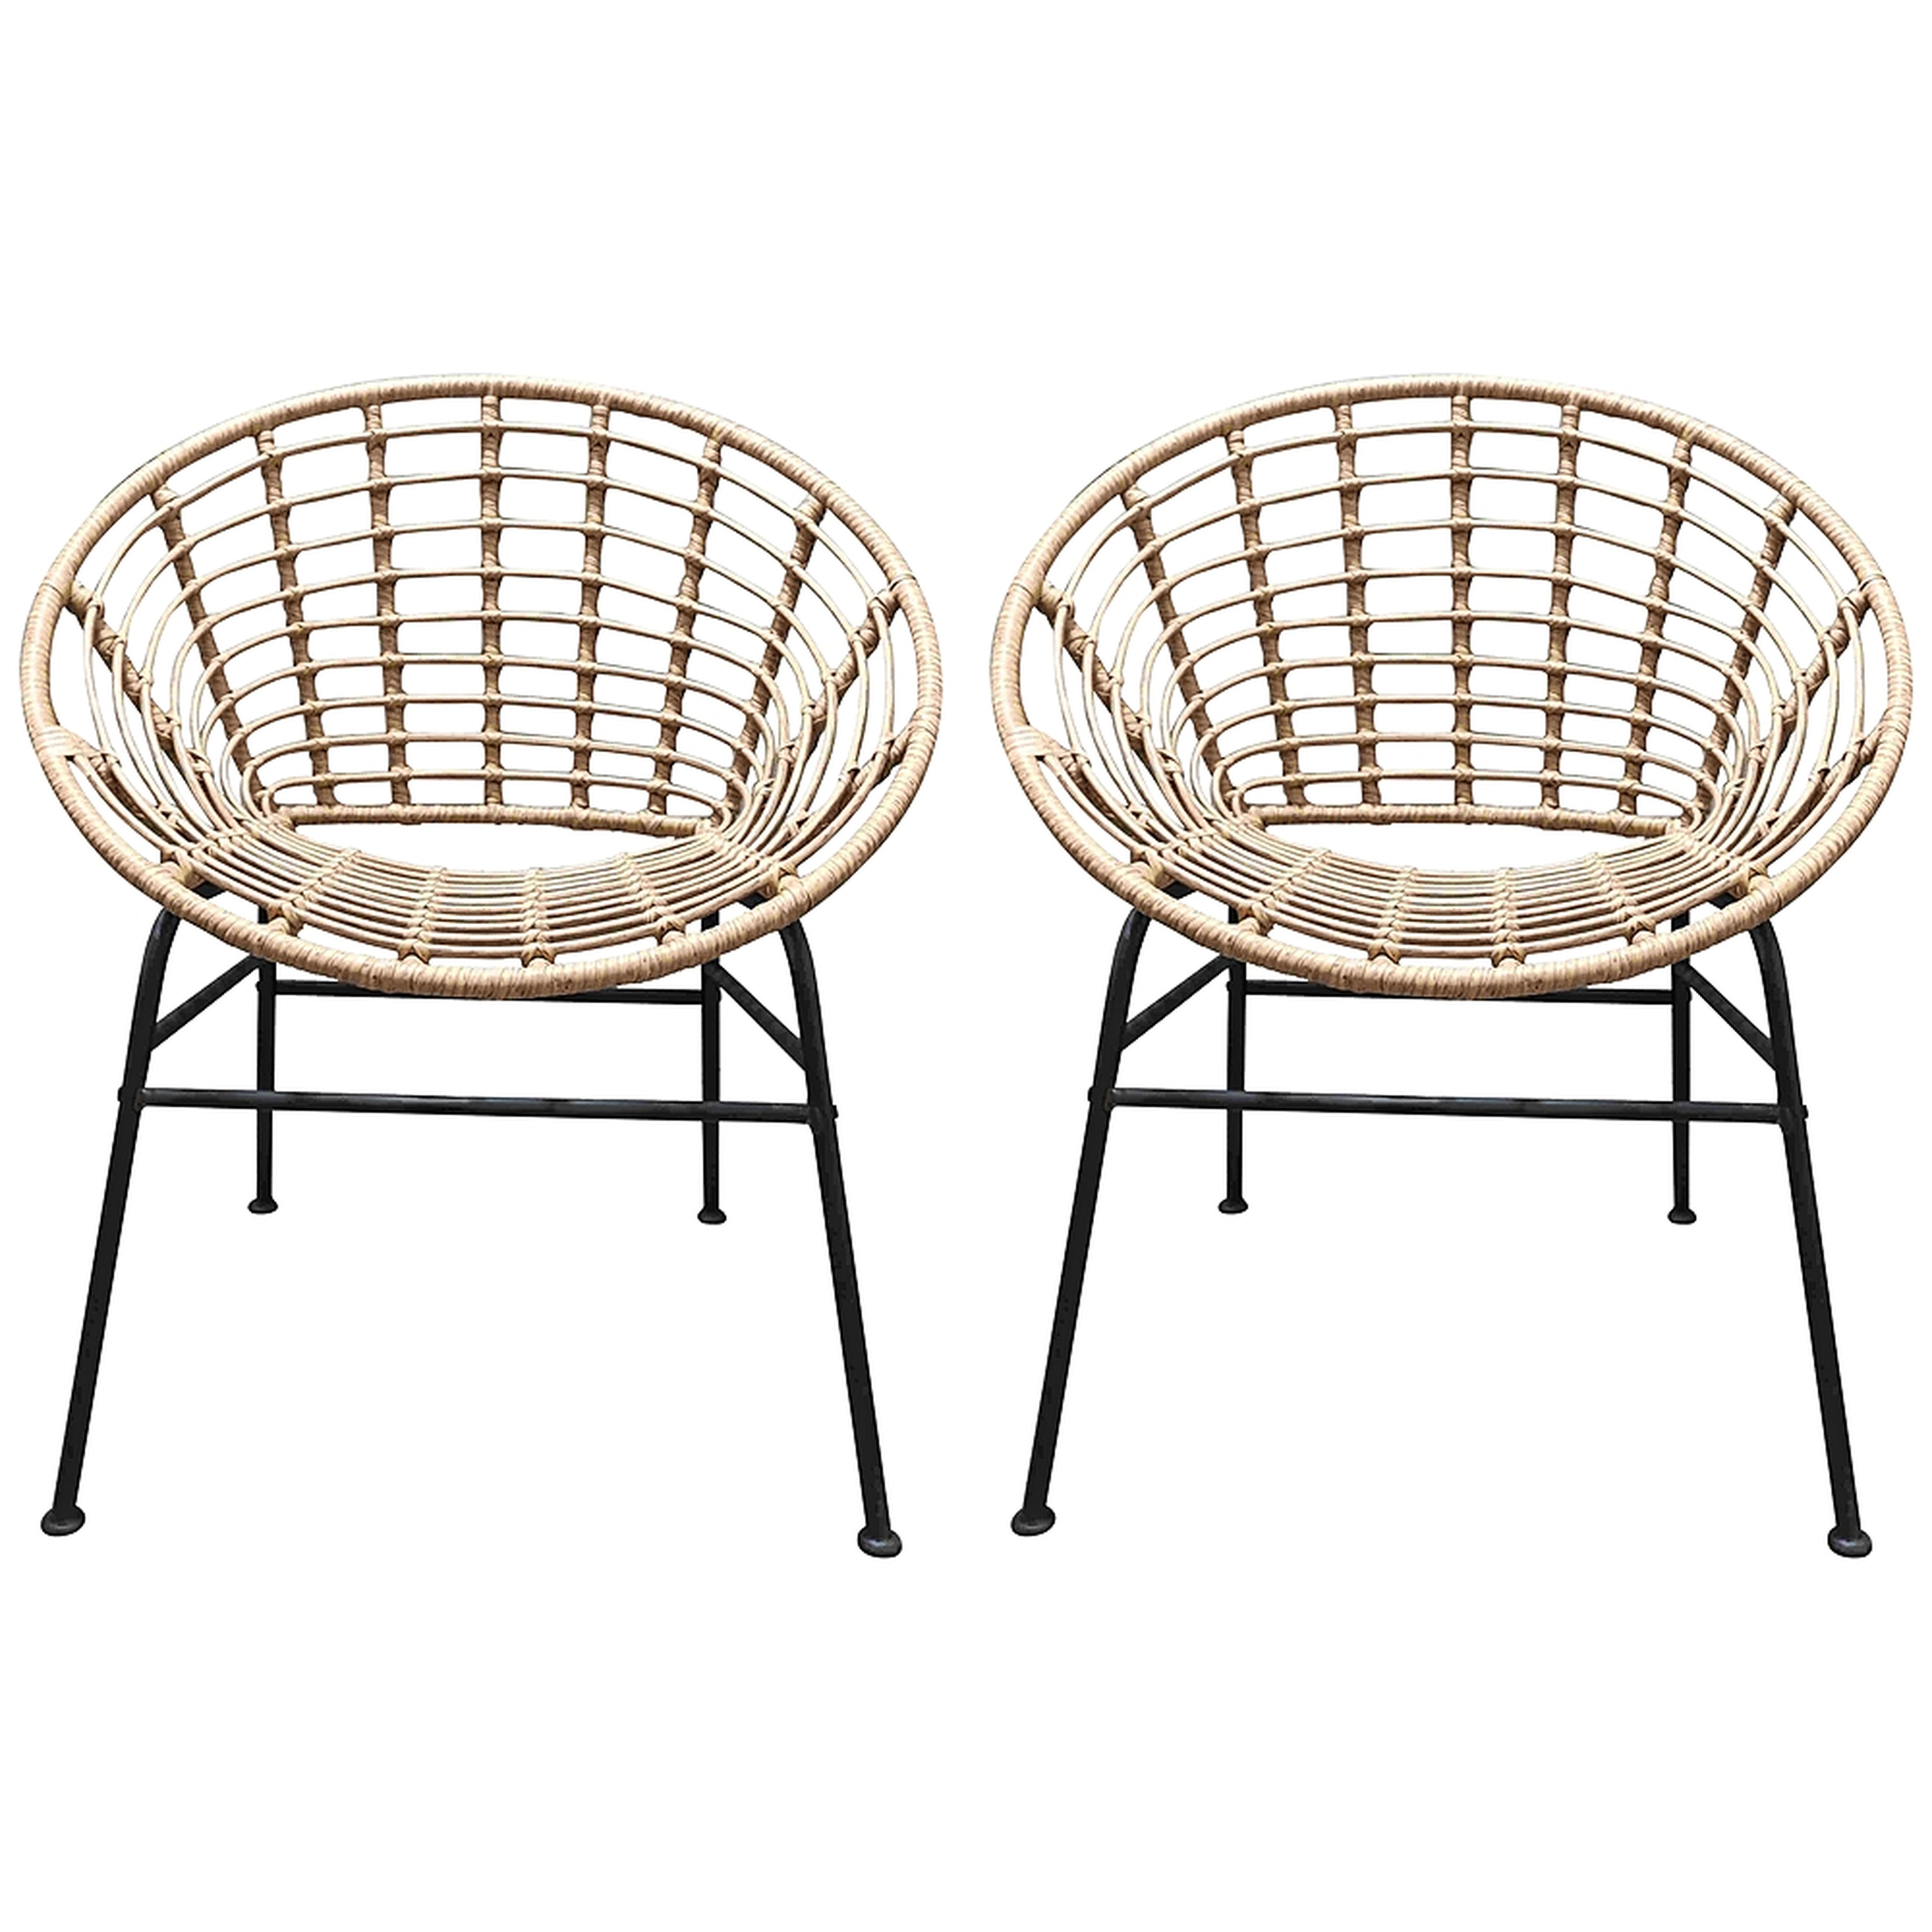 Zuo Cohen Natural Woven Outdoor Chairs Set of 2 - Style # 83J66 - Lamps Plus